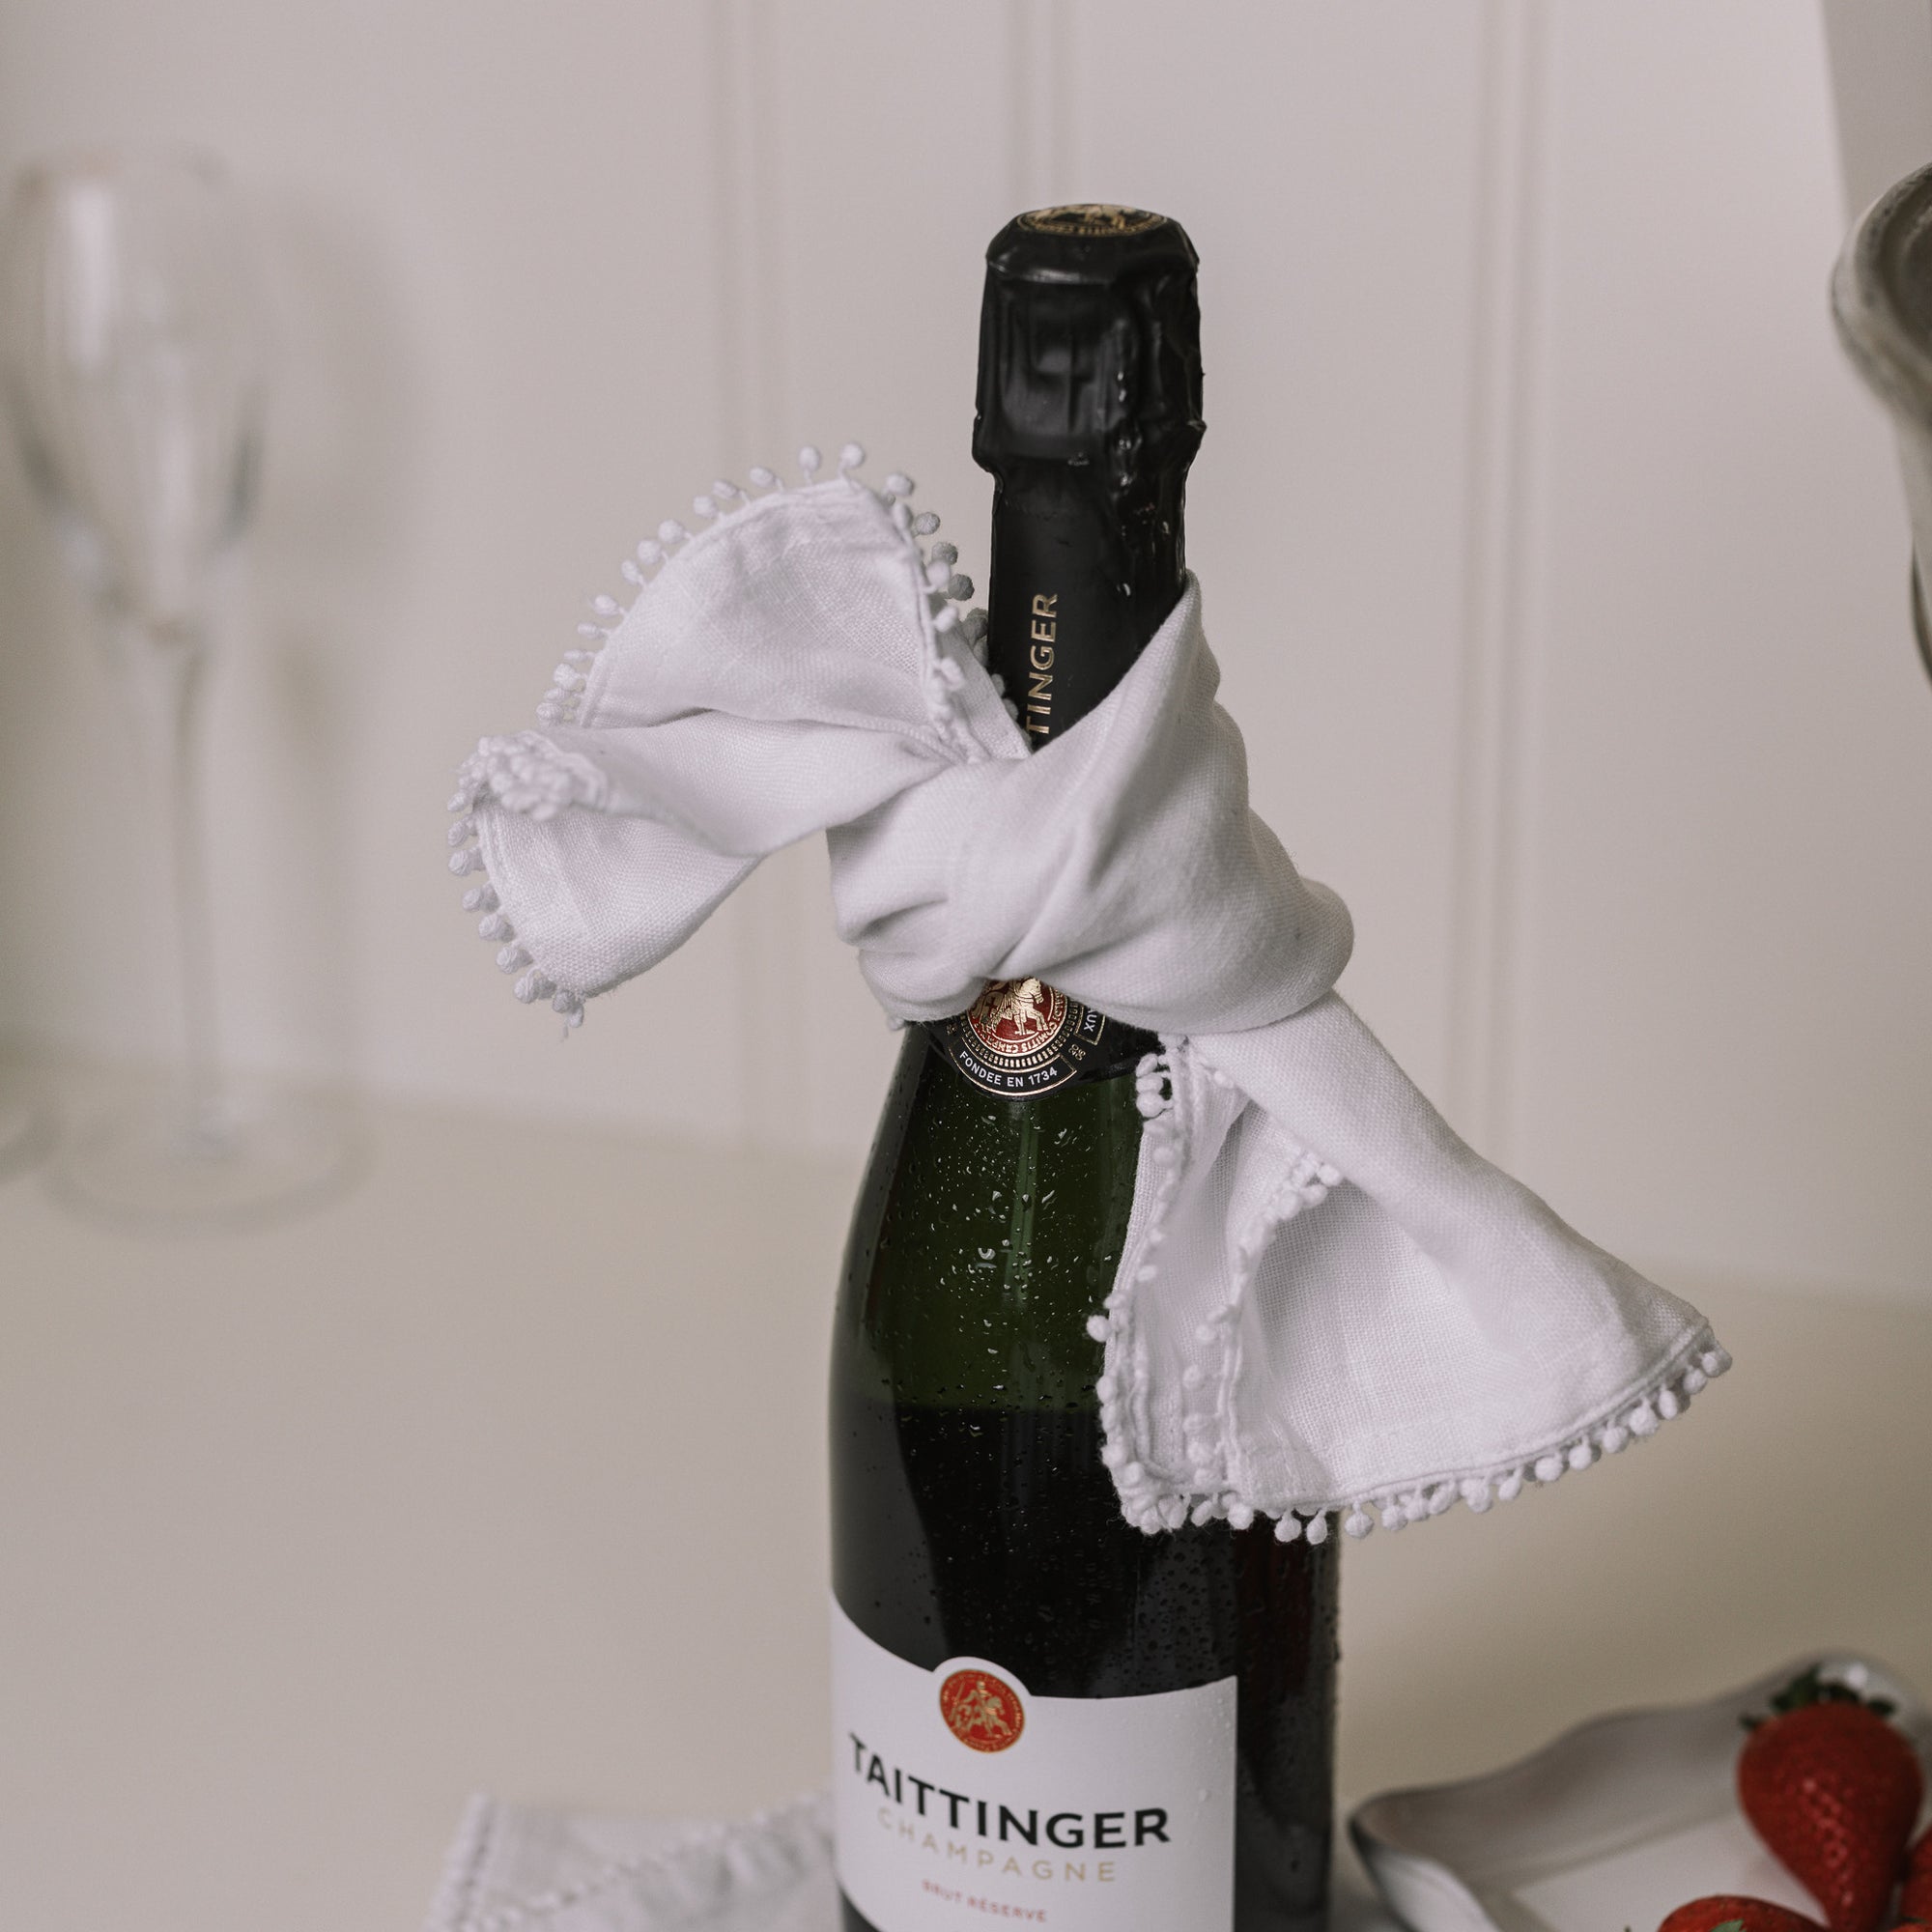 White linen napkin folded over with bobbles on the trim with champagne and strawberries.